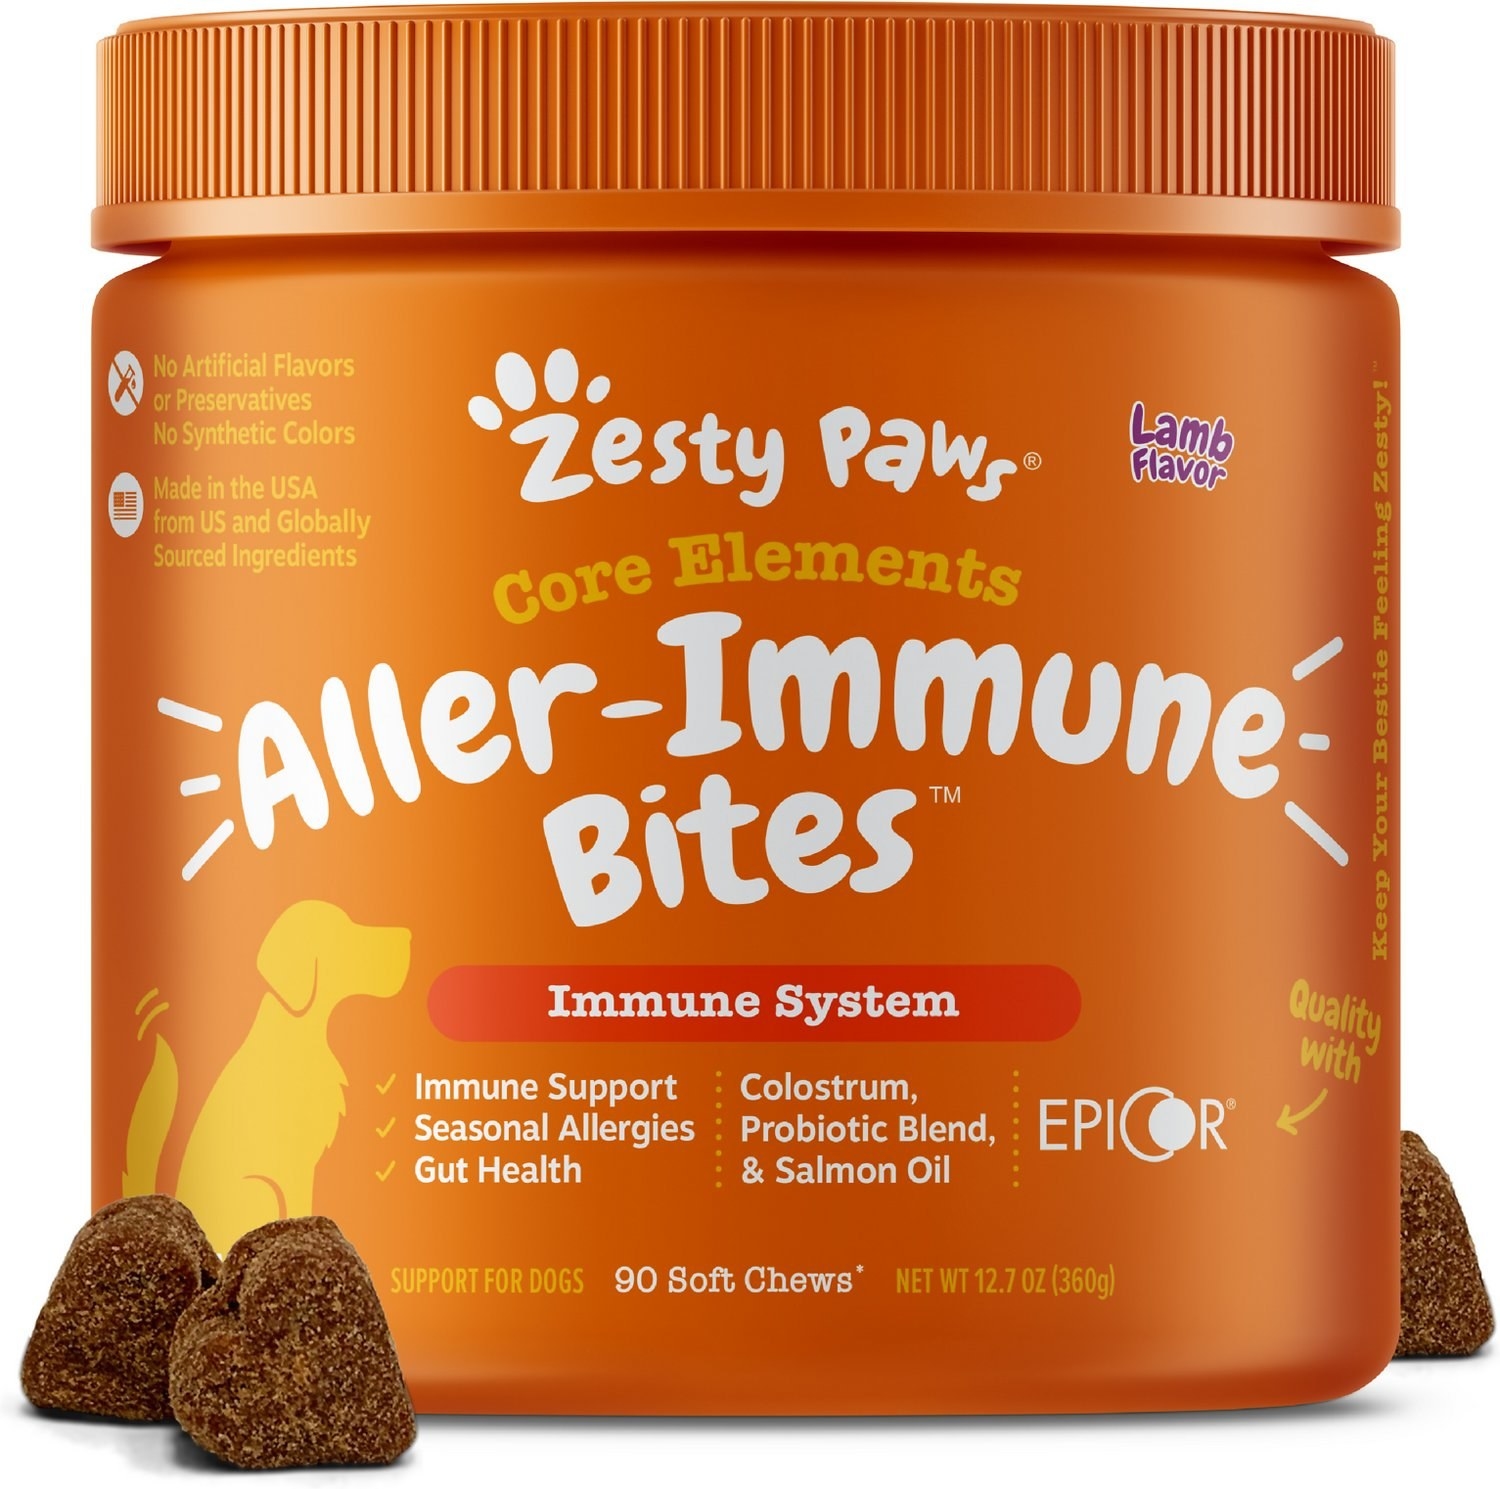 The allergy and immune supplement